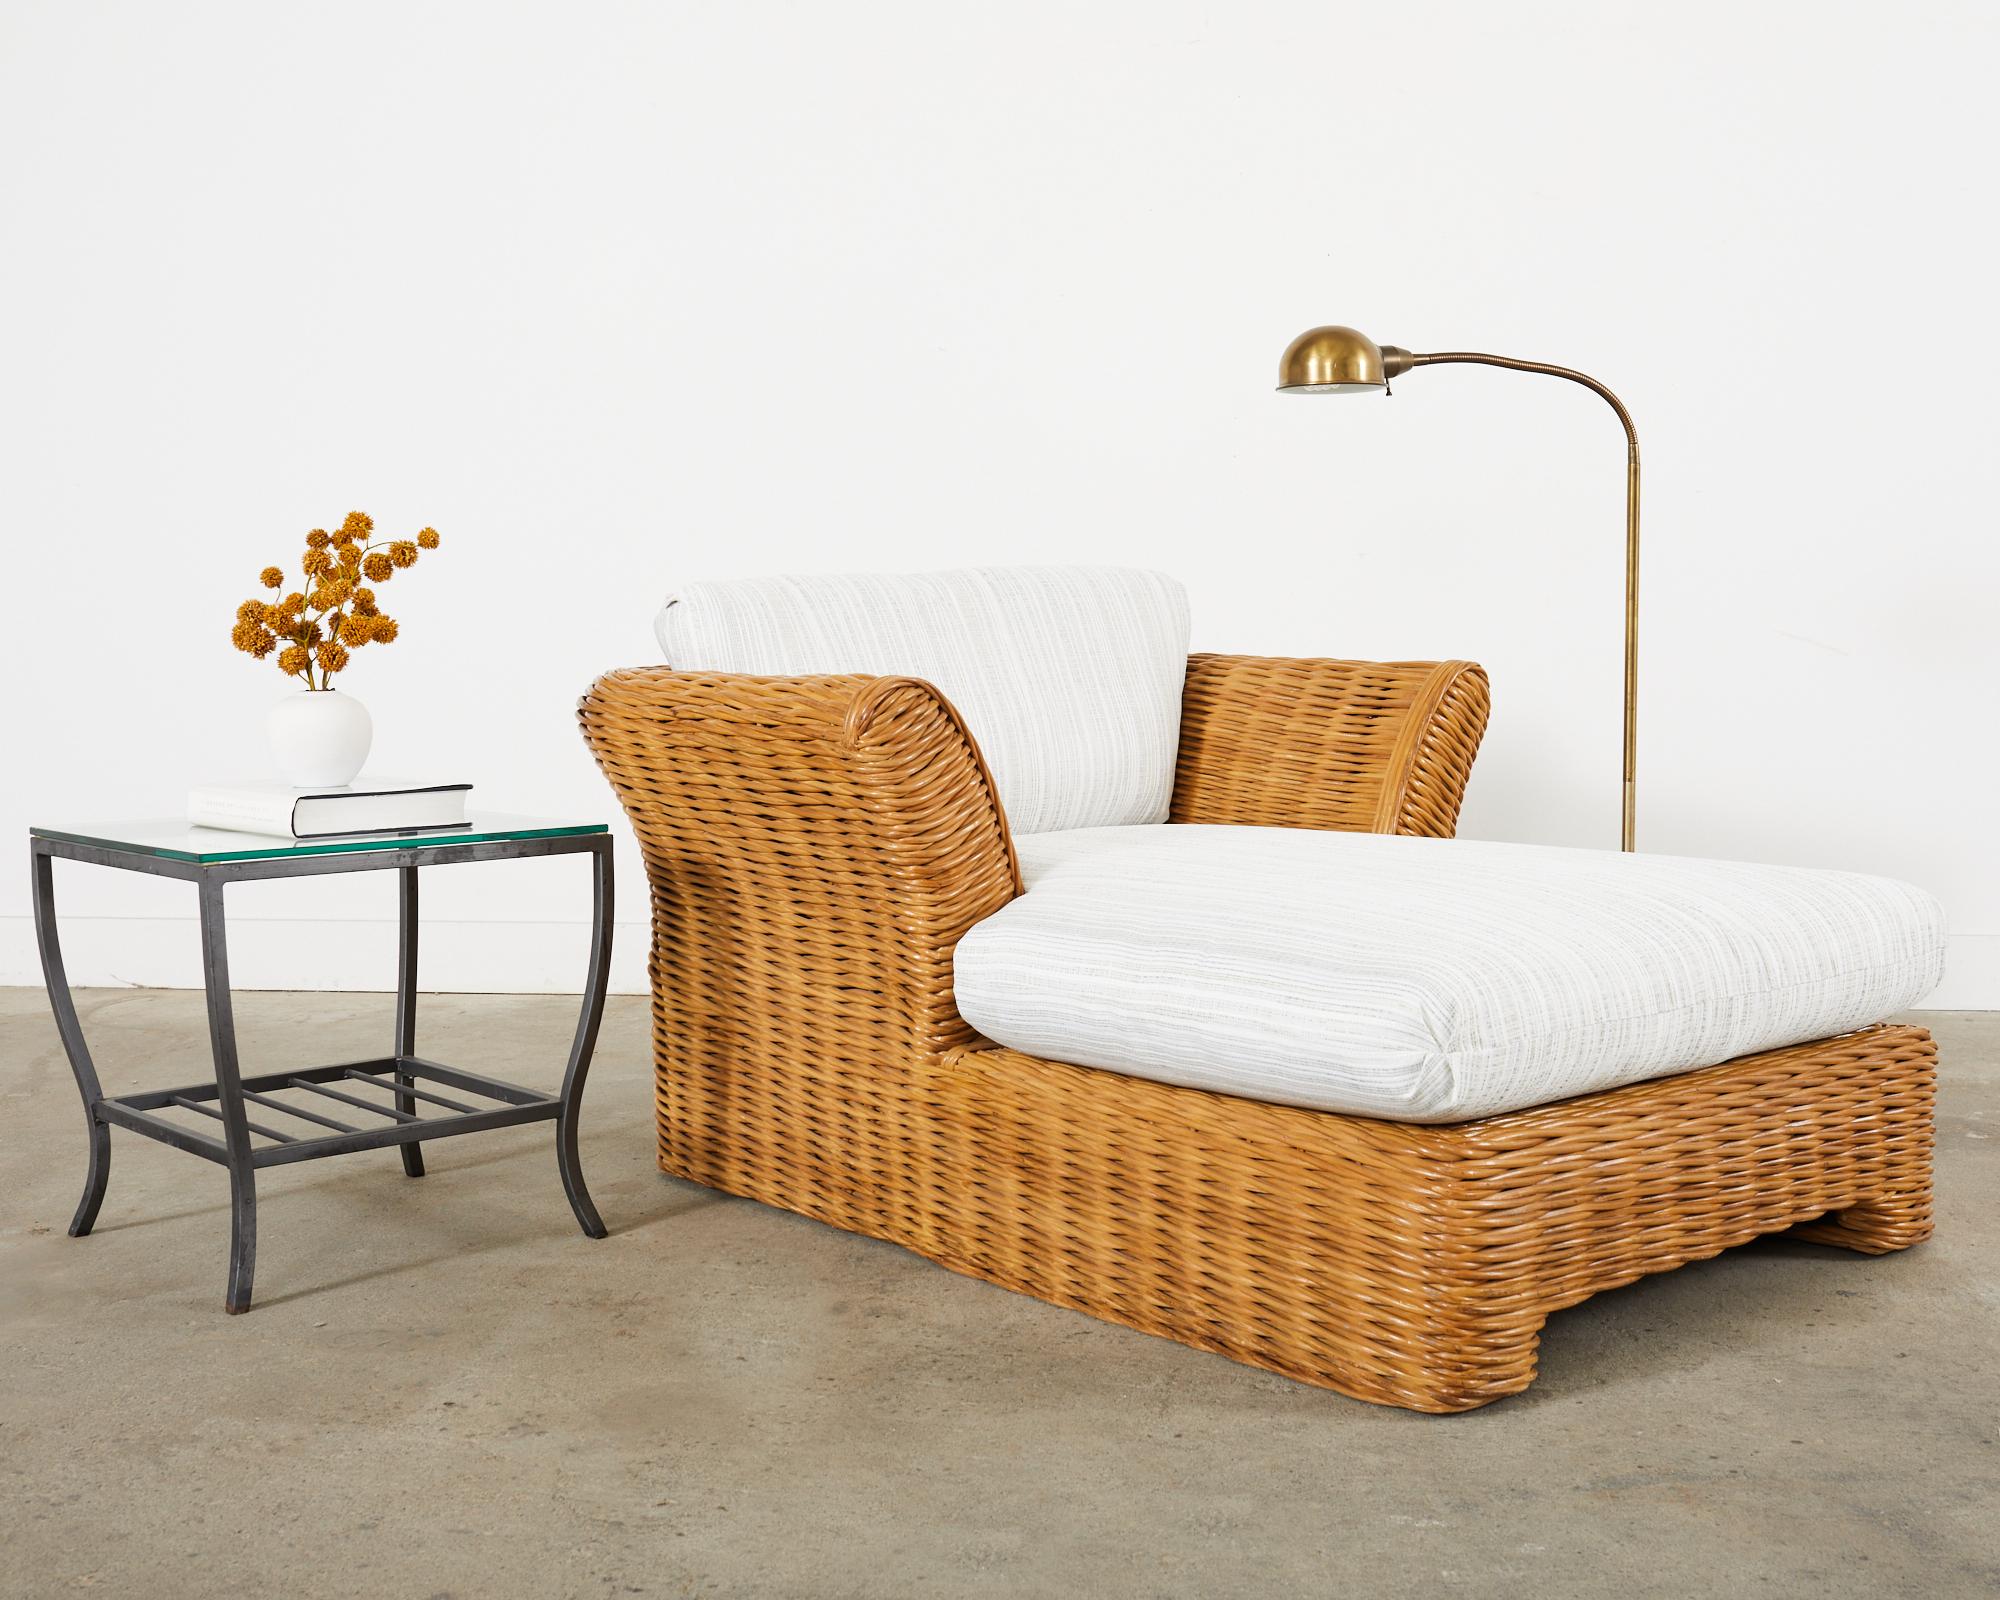 Grand organic modern chaise longue or chaise lounge chair crafted from thick pencil reed woven rattan in the California coastal manner and style of Michael Taylor. The chaise features a large frame with dramatic flared arms on each side. The frame